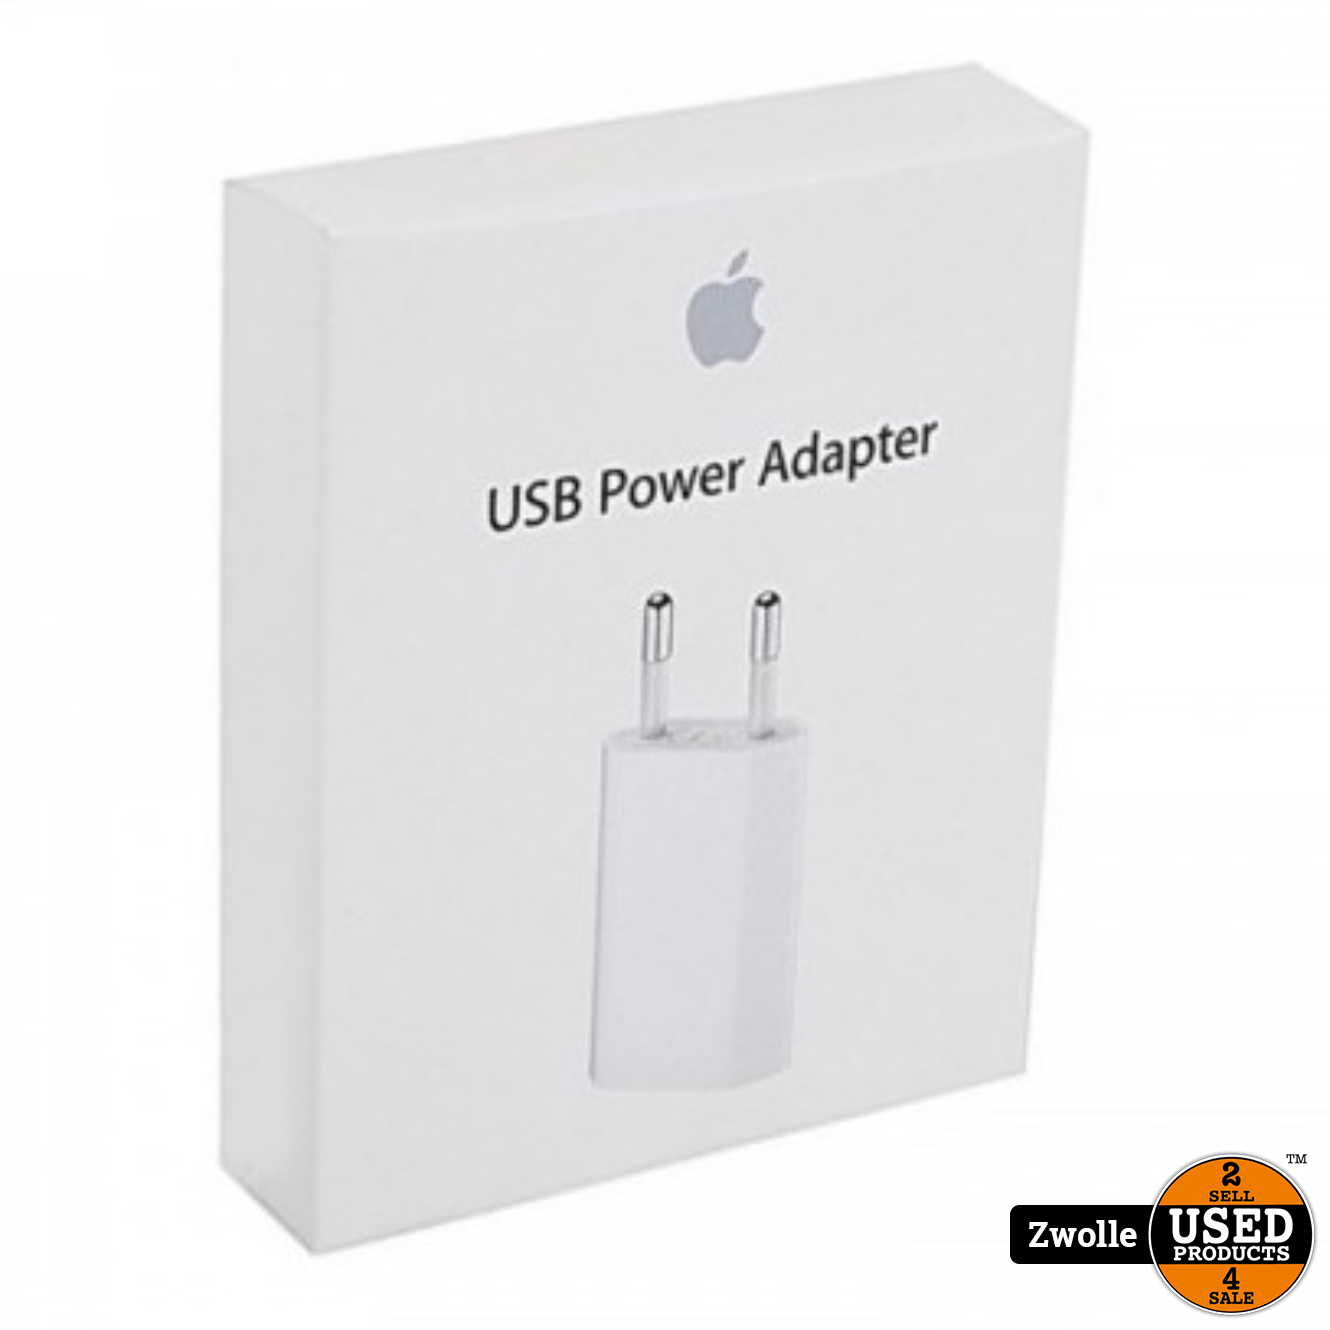 wang Geheim lassen Apple iPhone USB Power Adapter 5W - Used Products Zwolle